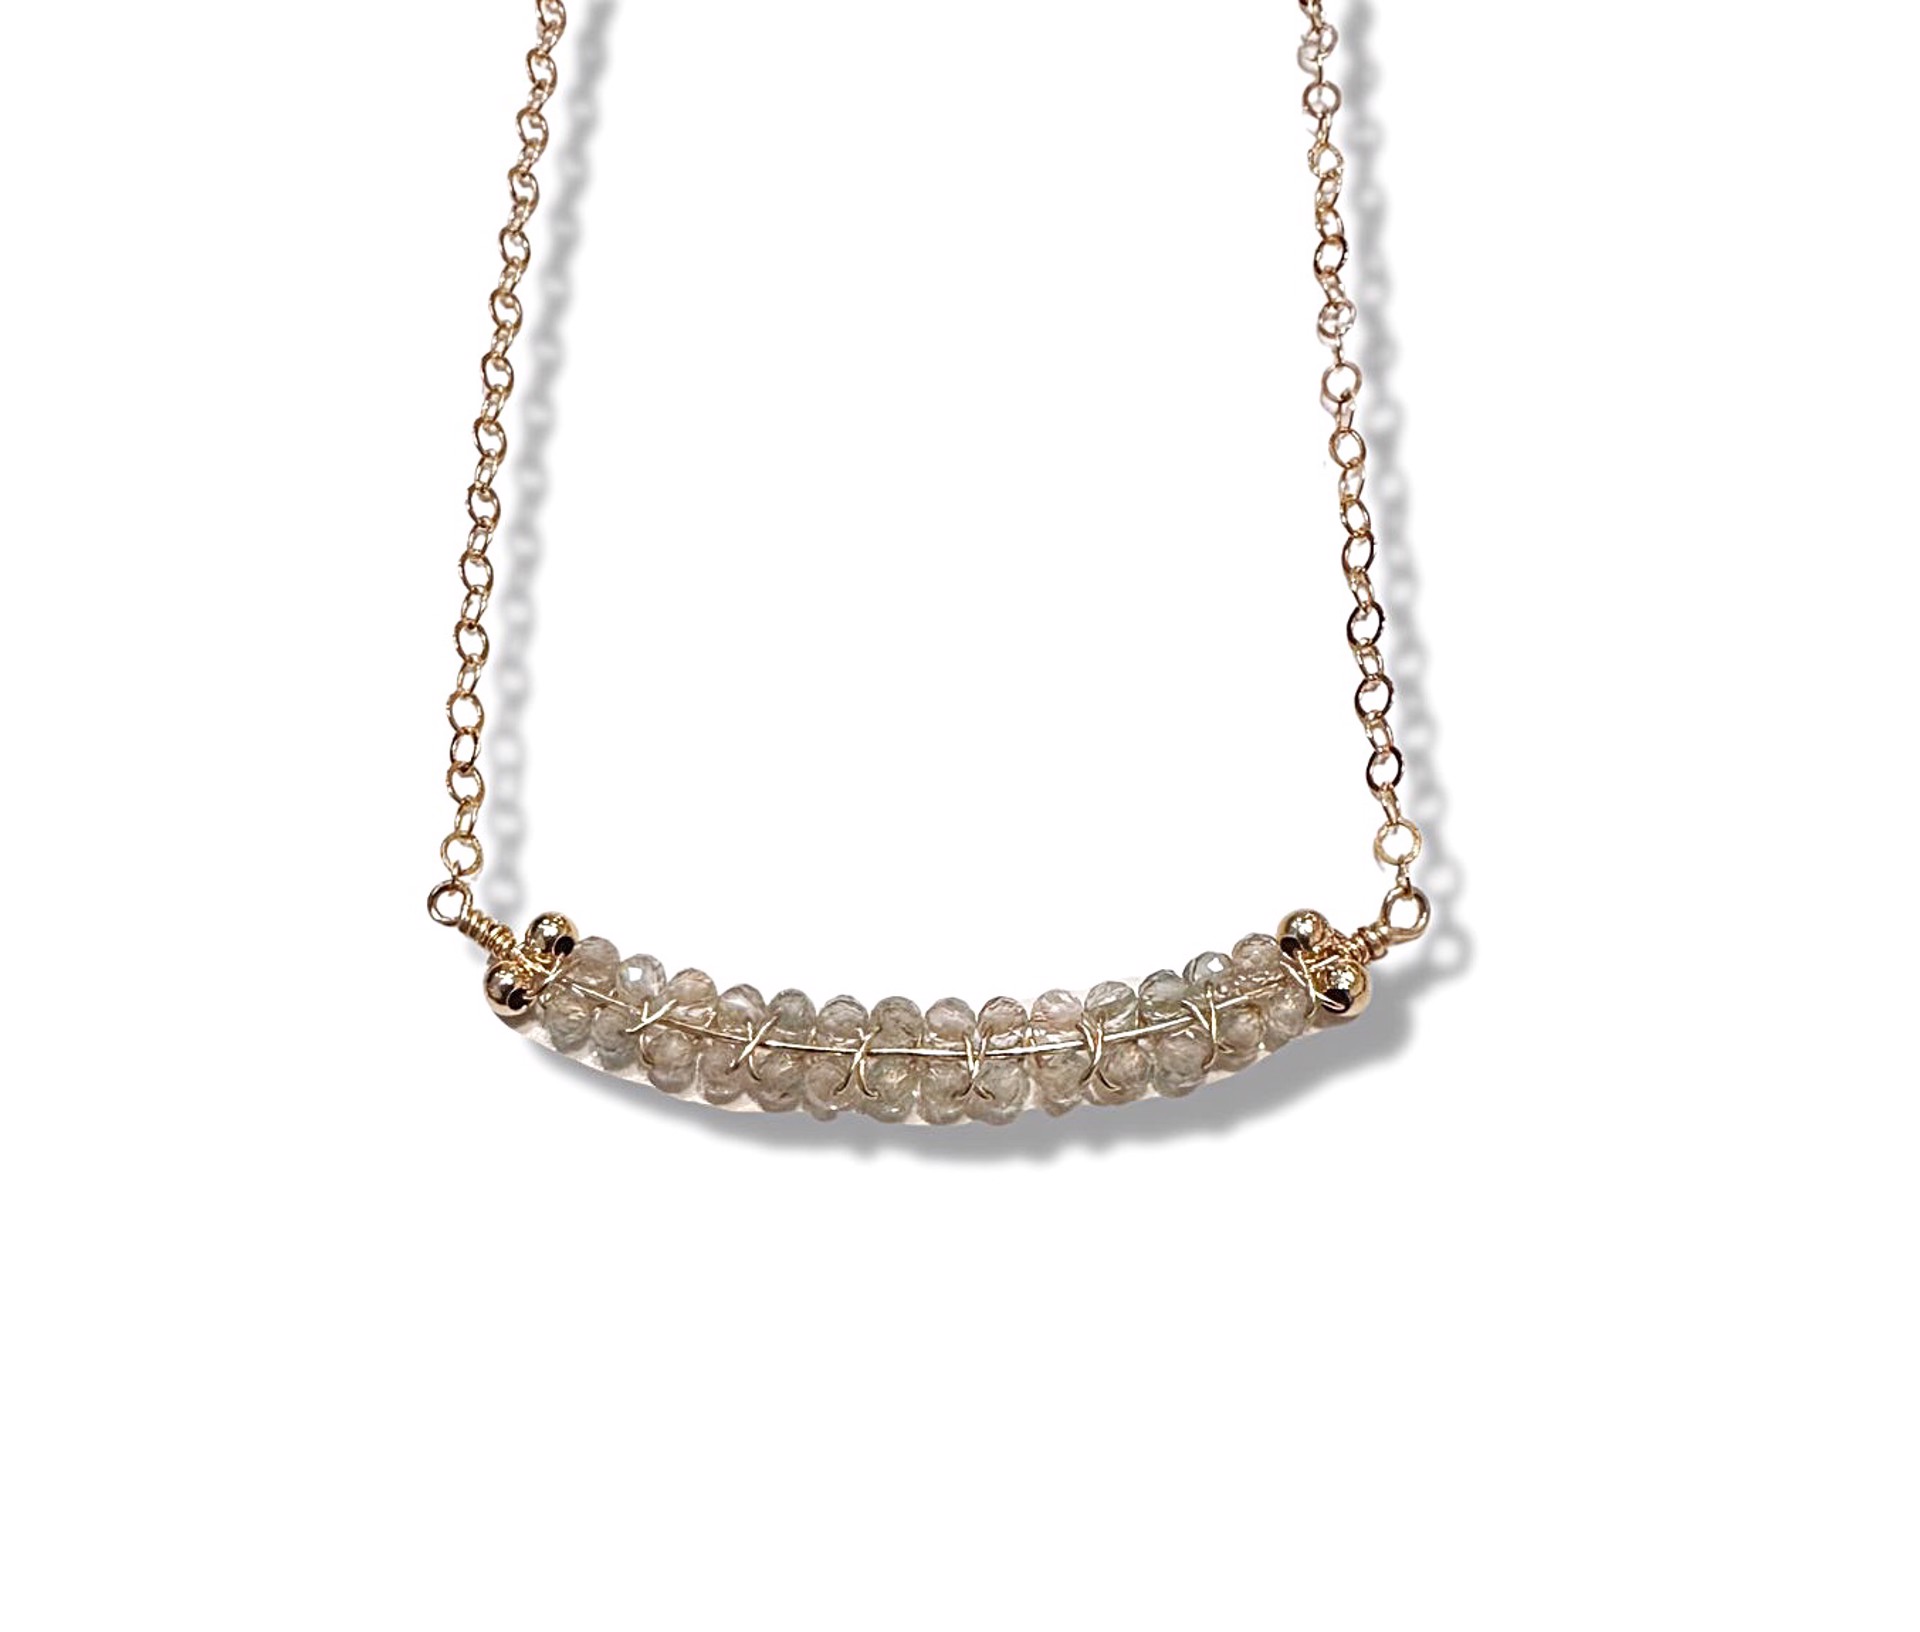 Necklace - Woven Blue Zircon set in 14K Gold Filling by Julia Balestracci